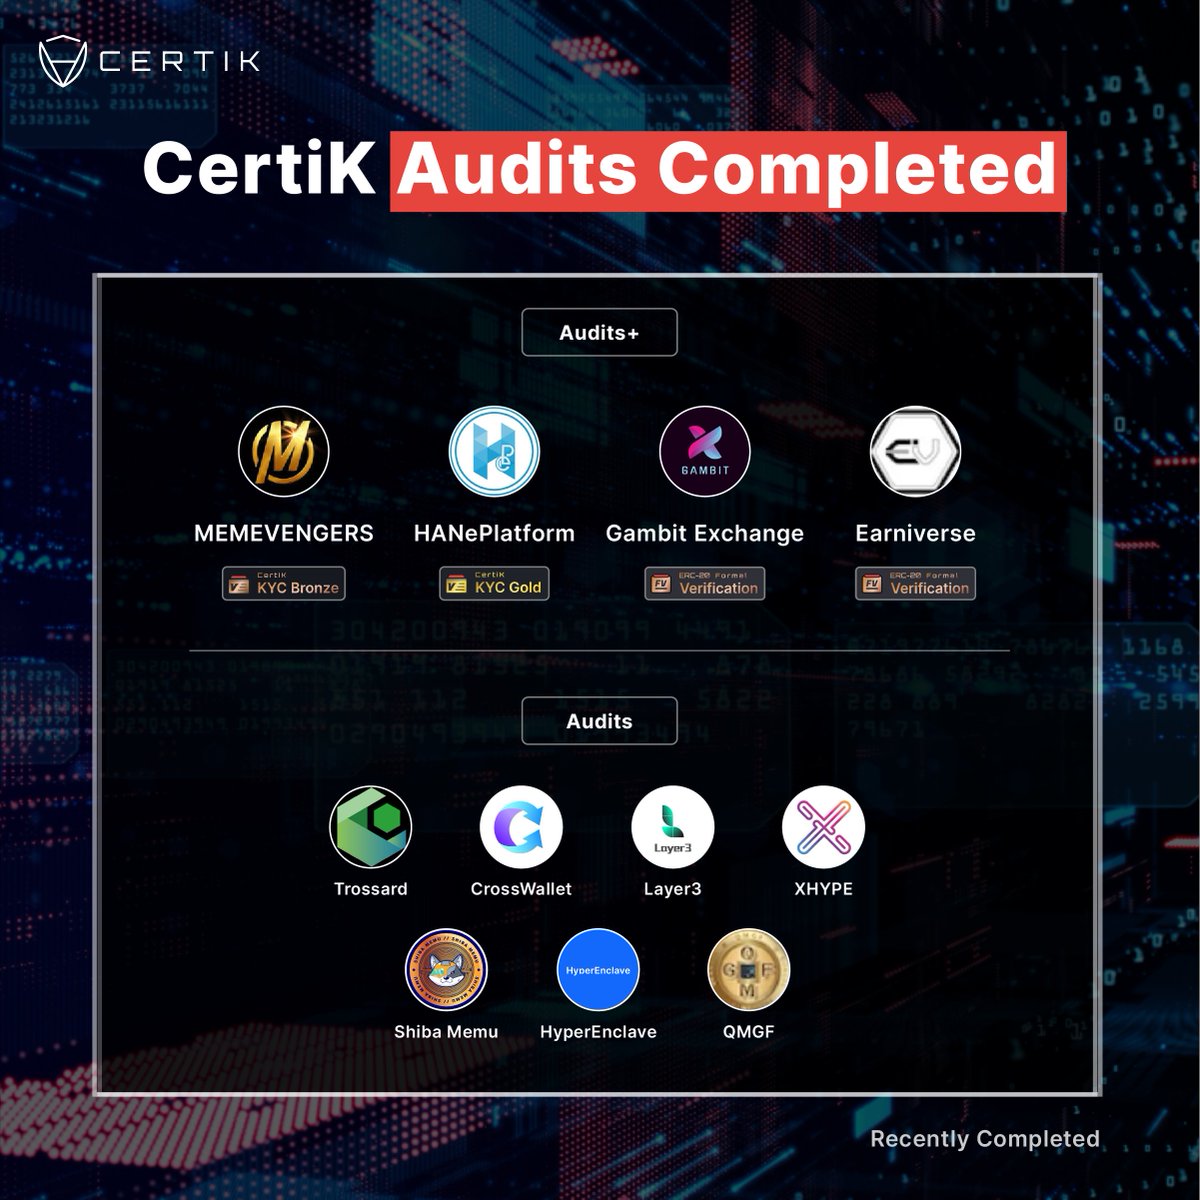 Smart contract audits completed! 🔐 

CertiK recently completed 1️⃣1️⃣audits this week to further secure the Web3 space. Check the leaderboard out below. ⬇️

skynet.certik.com/?utm_source=Tw…

#CertiK $MMVG #GambitEvent $EIV $TROSS #CrossWallet #Layer3 $XHP $SHMU